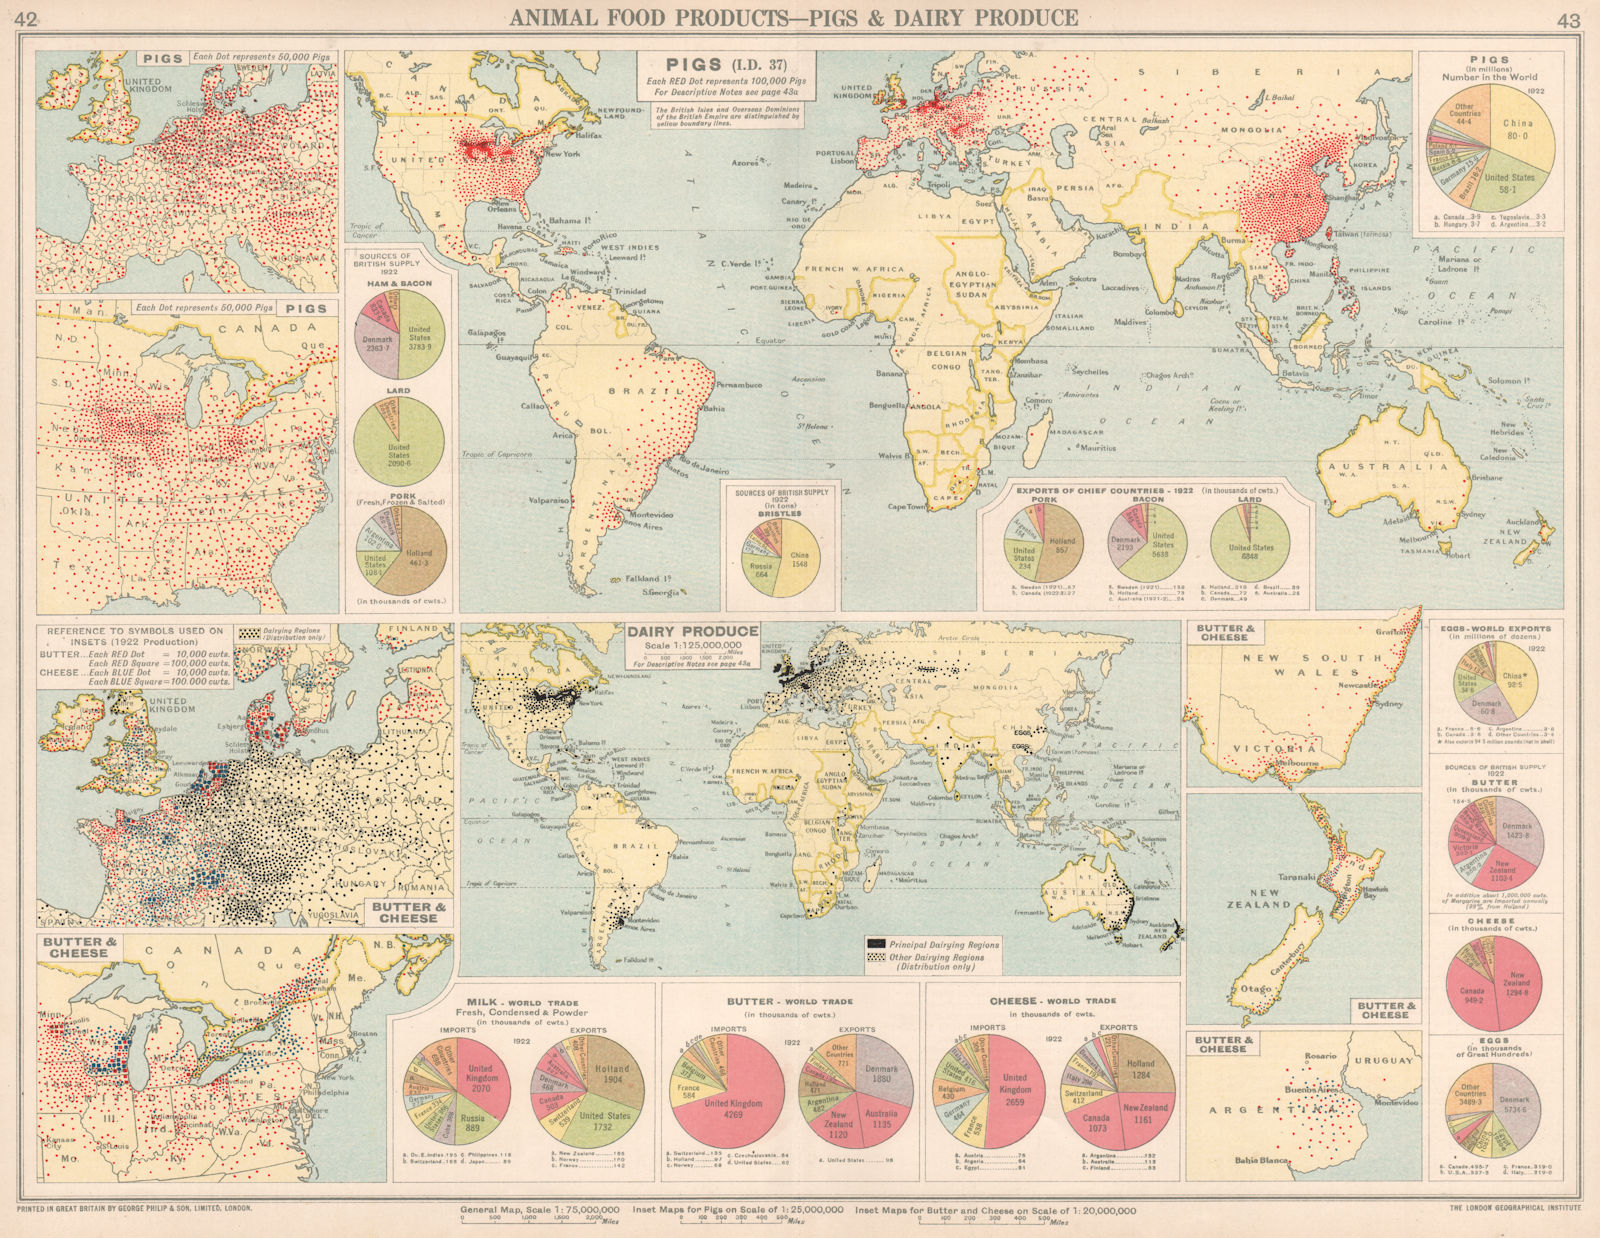 World. Animal Food Production. Pigs & Dairy Produce. Europe China 1925 old map